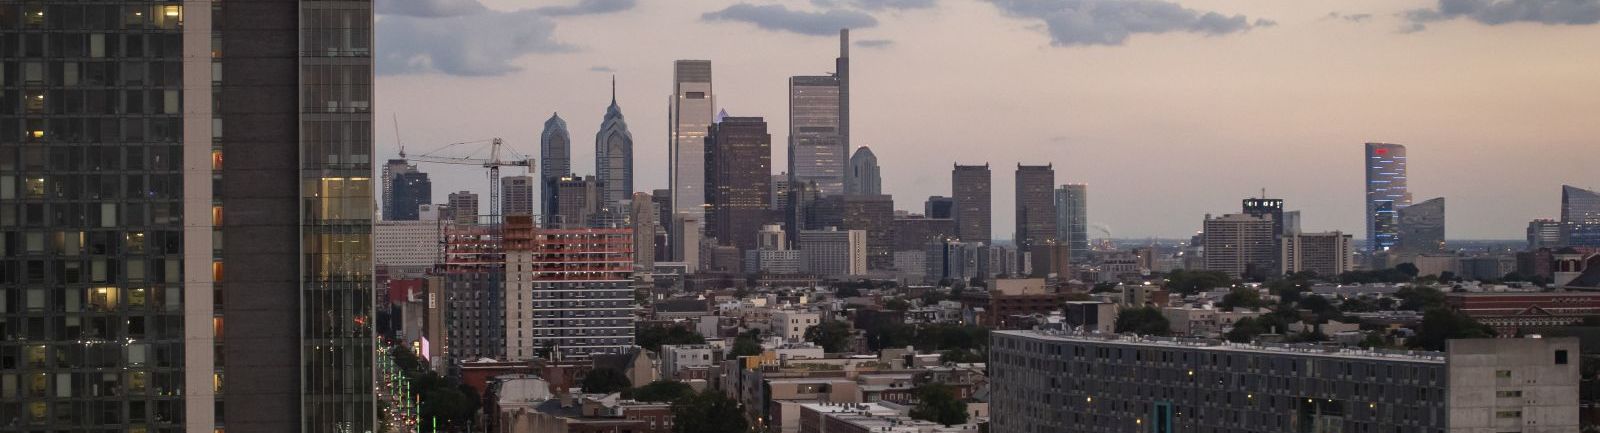 The Philadelphia skyline as seen from Temple Main Campus.